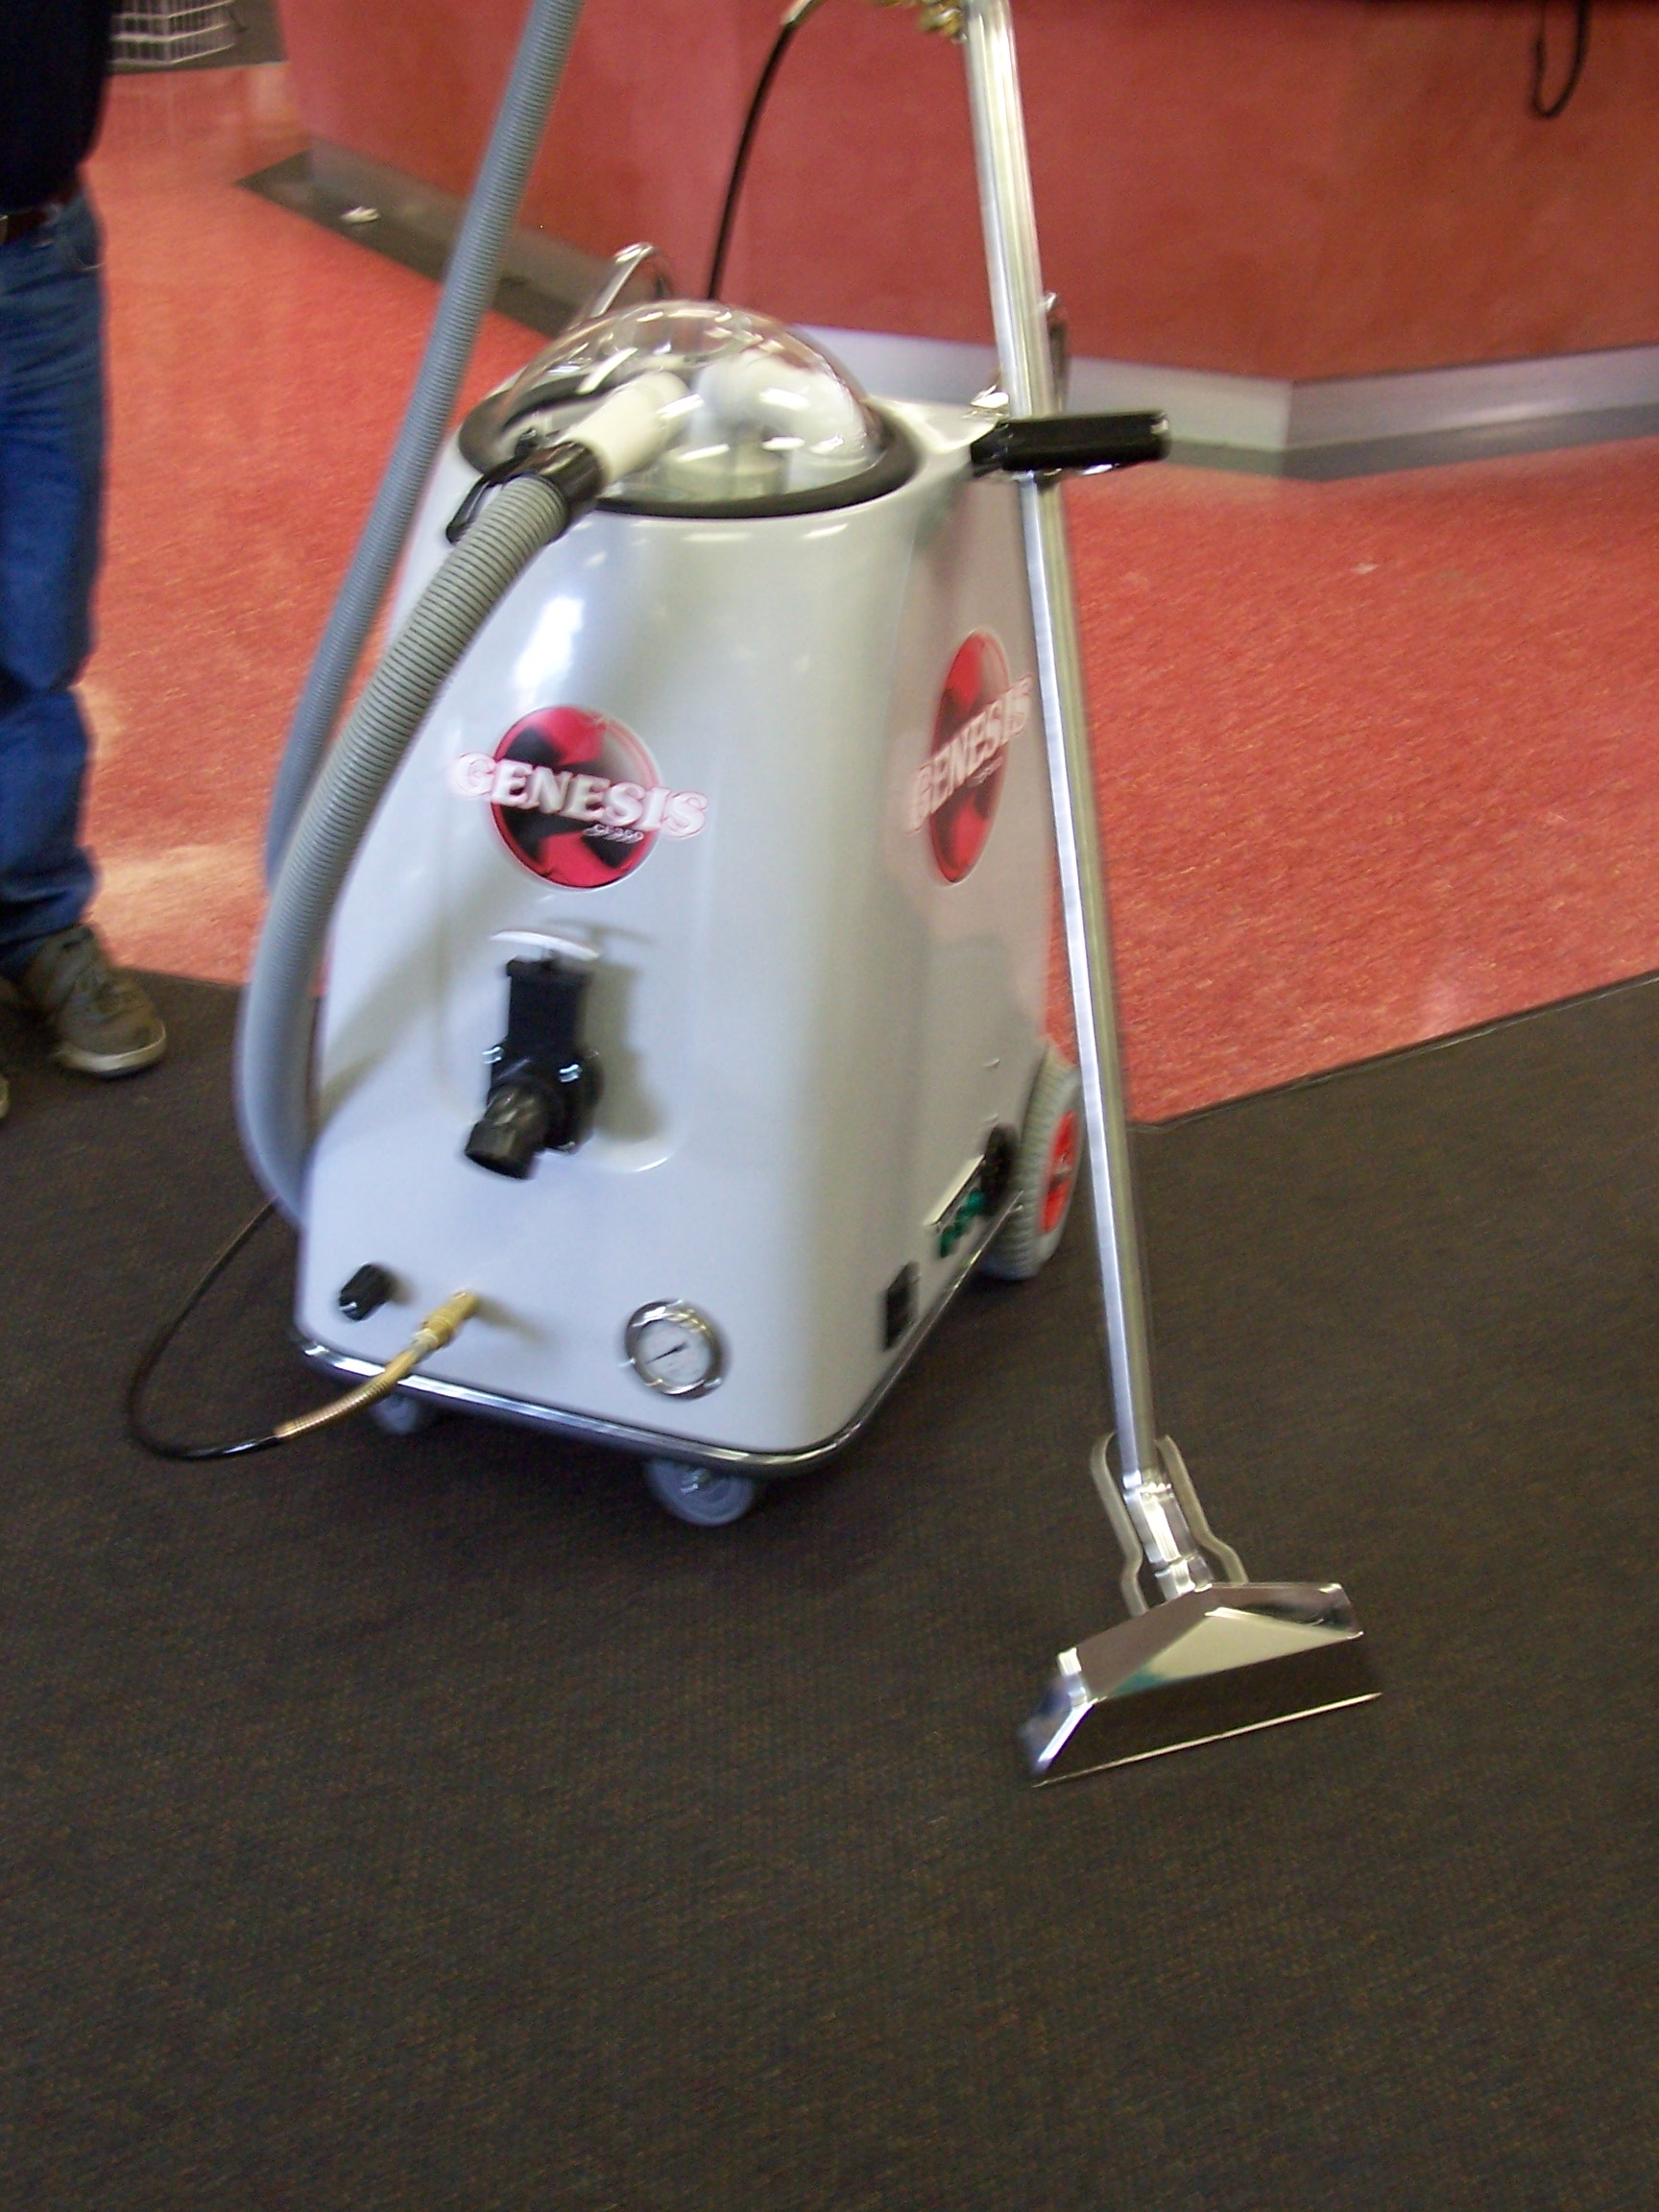 Carpet Cleaning Equipment & Chemicals